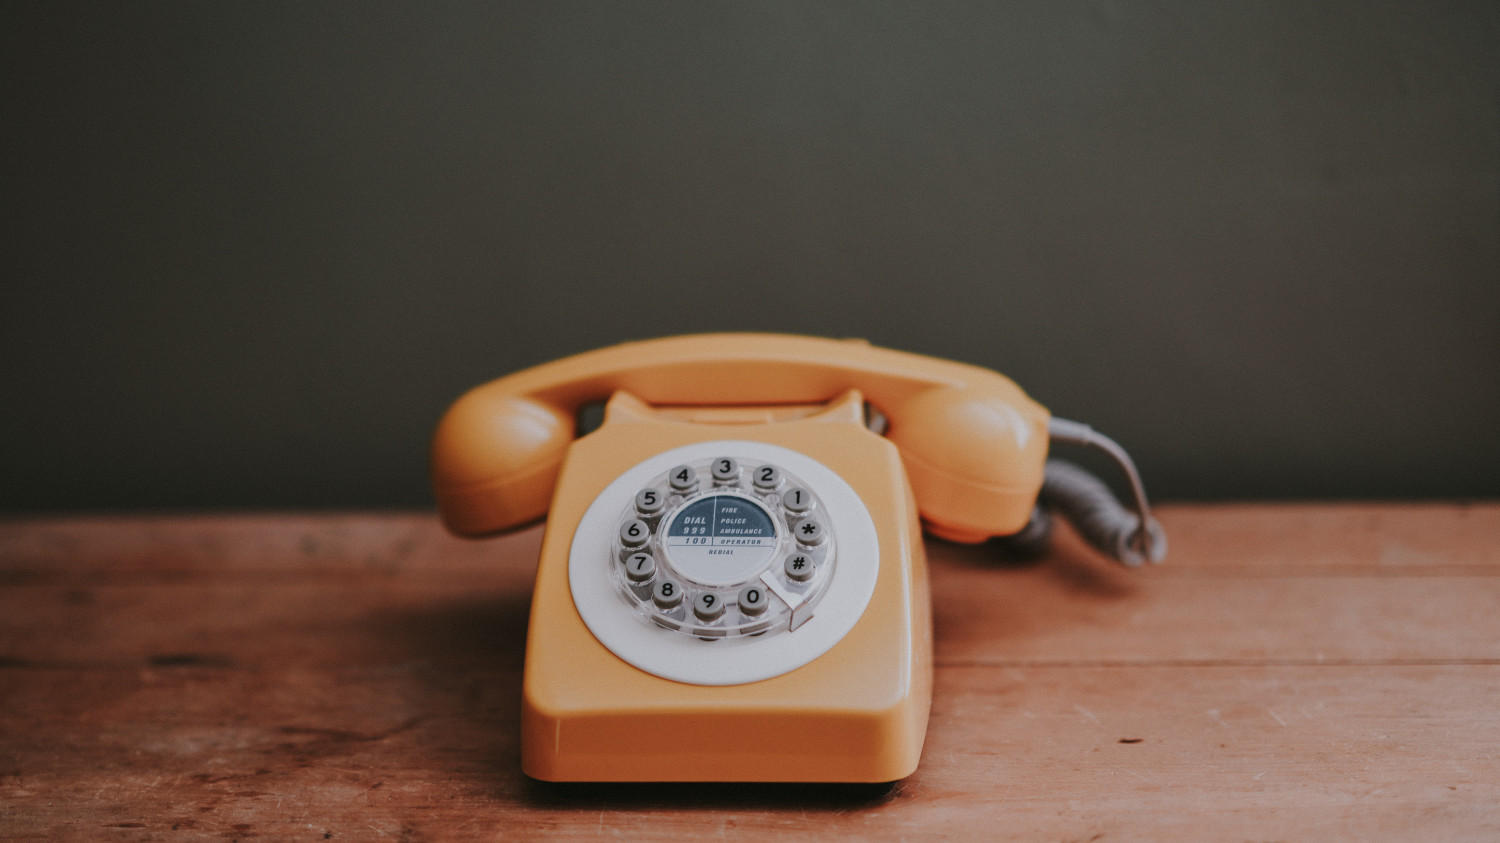 Image of an orange rotary phone on a wooden desk